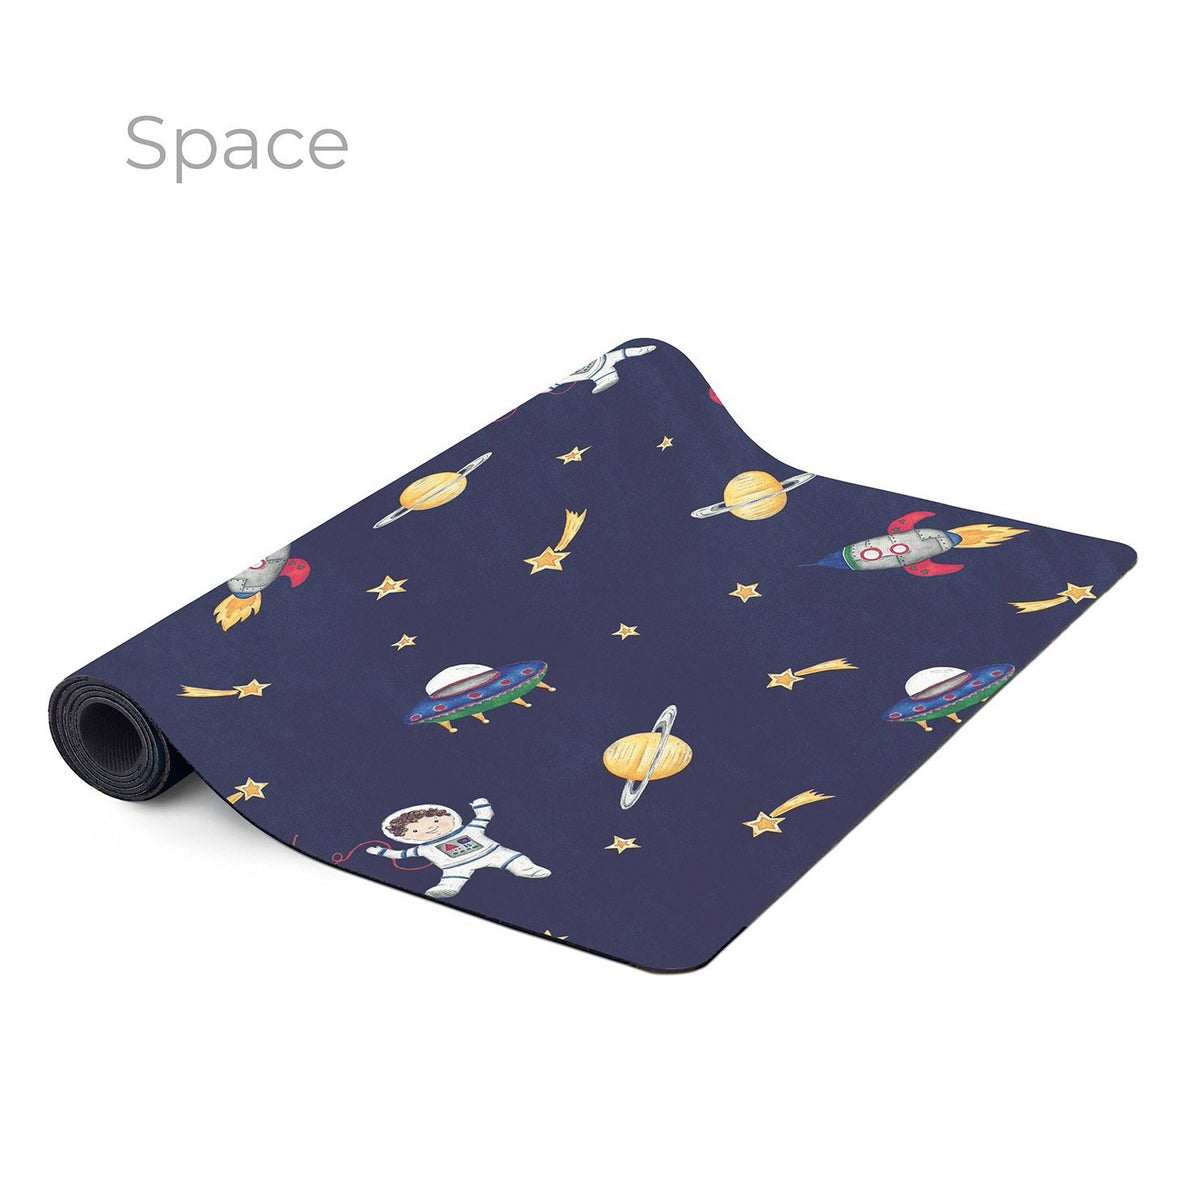 Fun kid sized yoga mat, with poses printed right on the mat